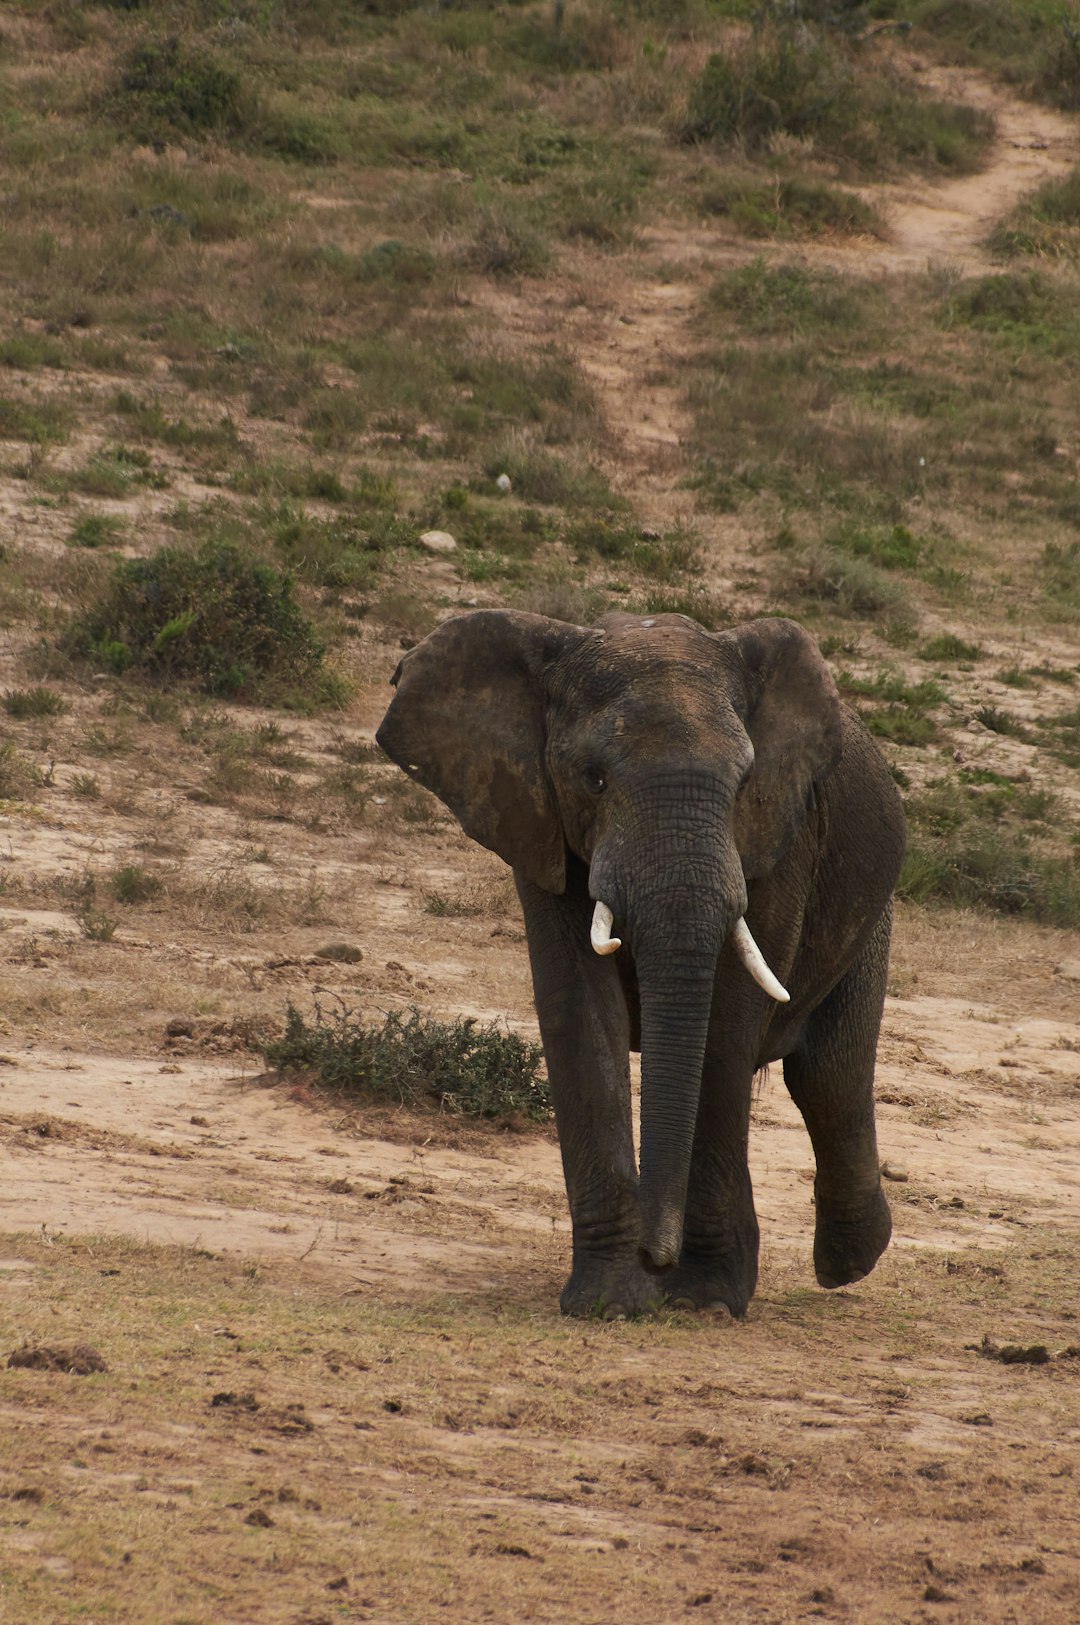 elephant walking on brown field during daytime